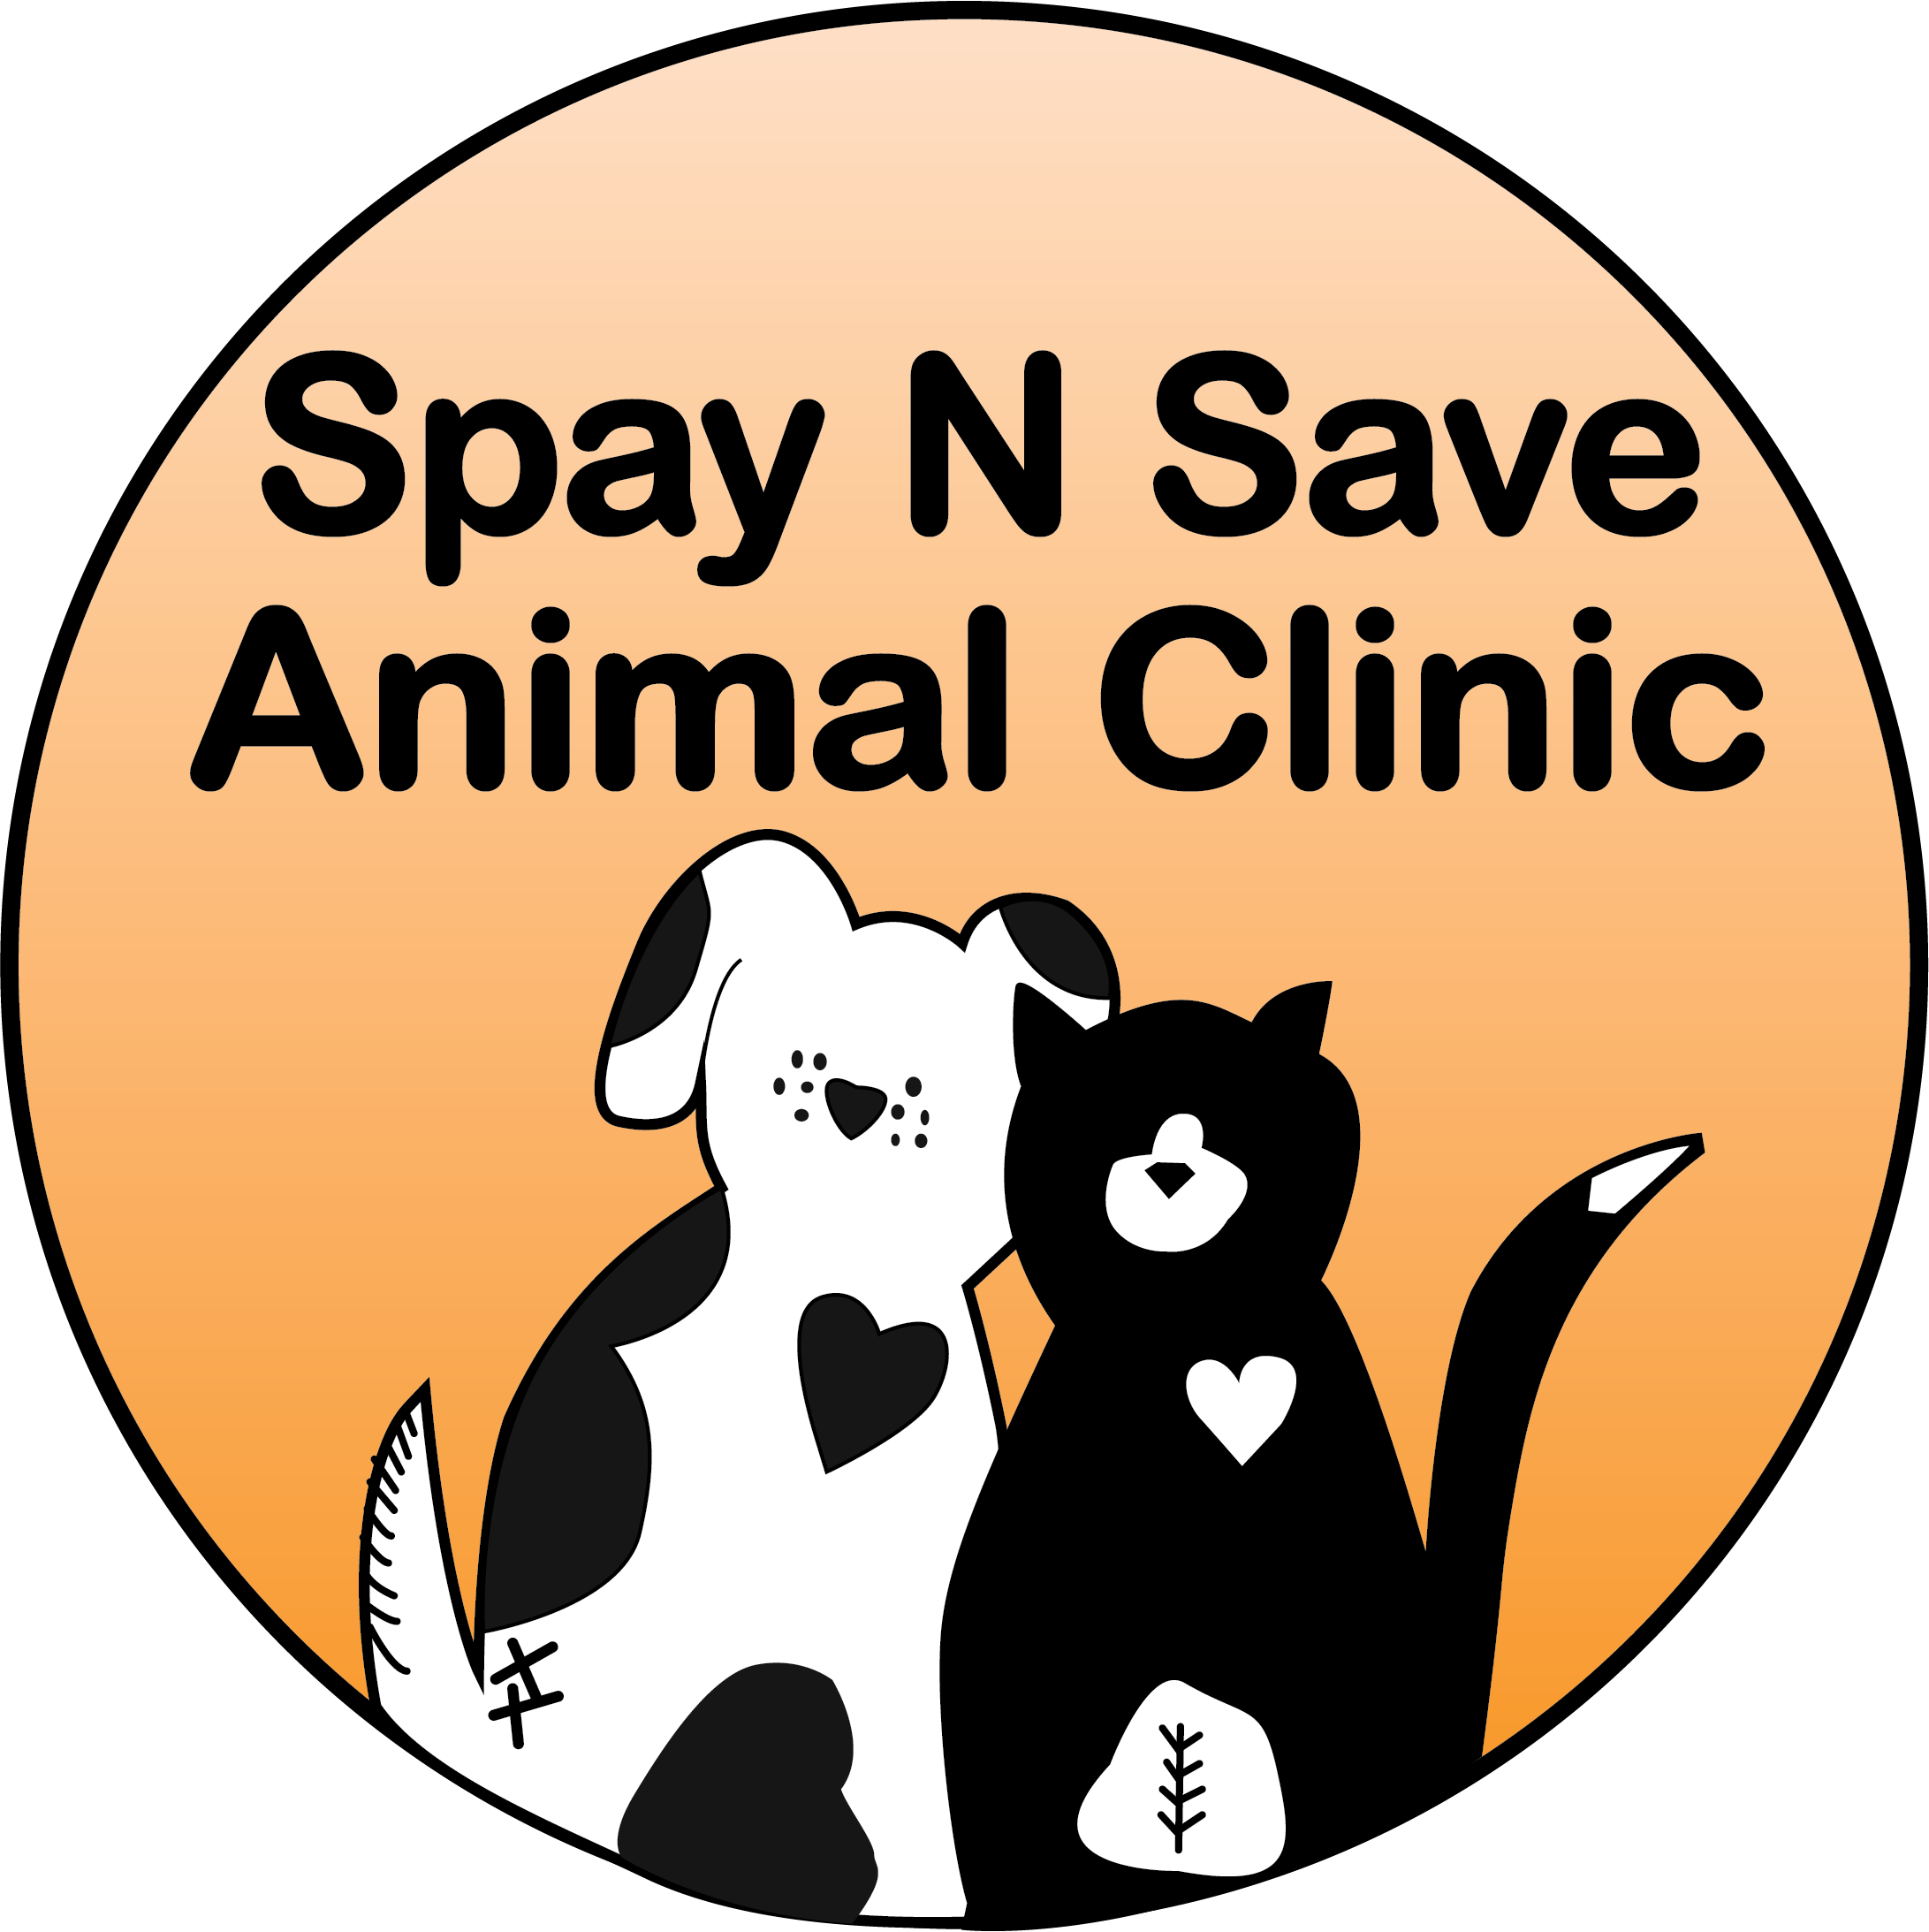 Spay N Save Animal Clinic Is Going Solar with Solar Source!